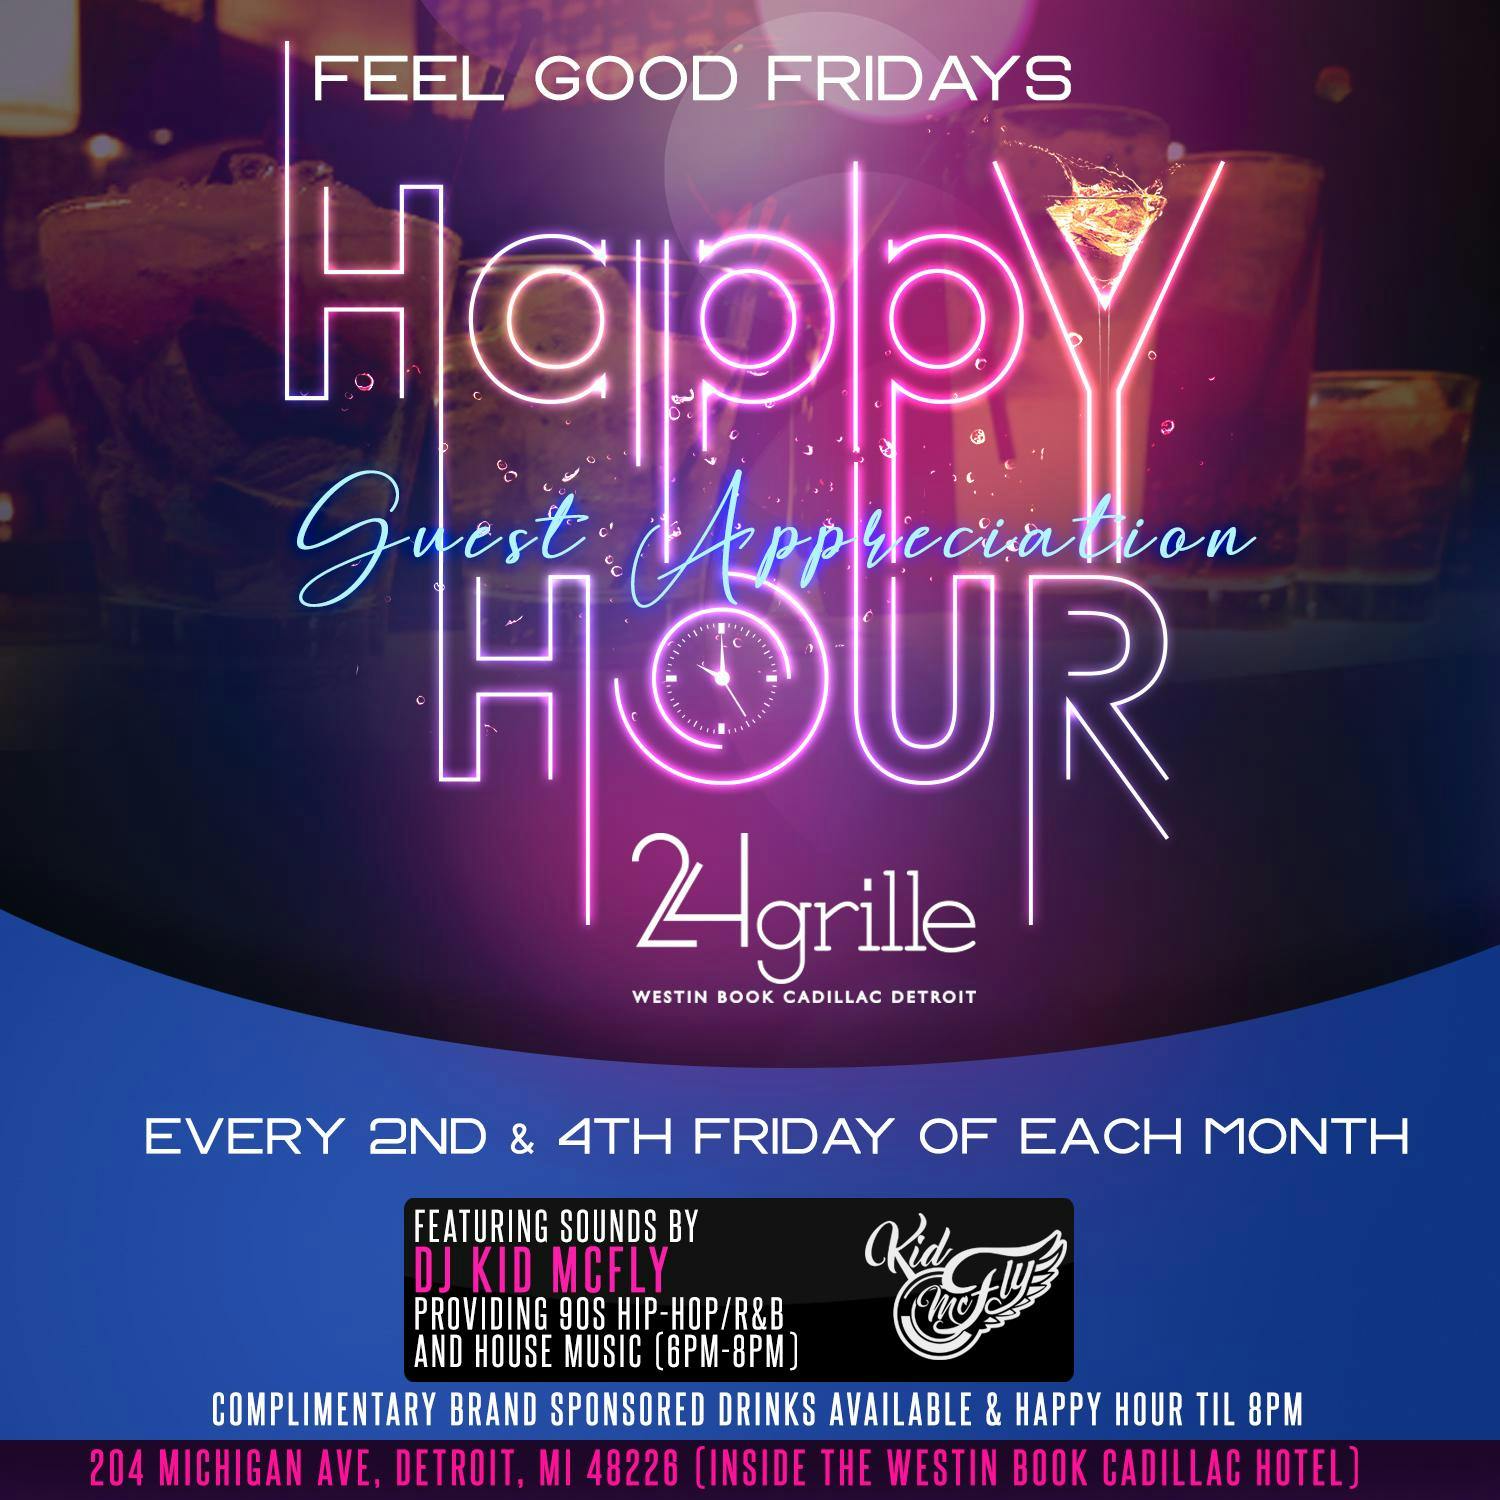 #FeelGoodFridays at 24Grille